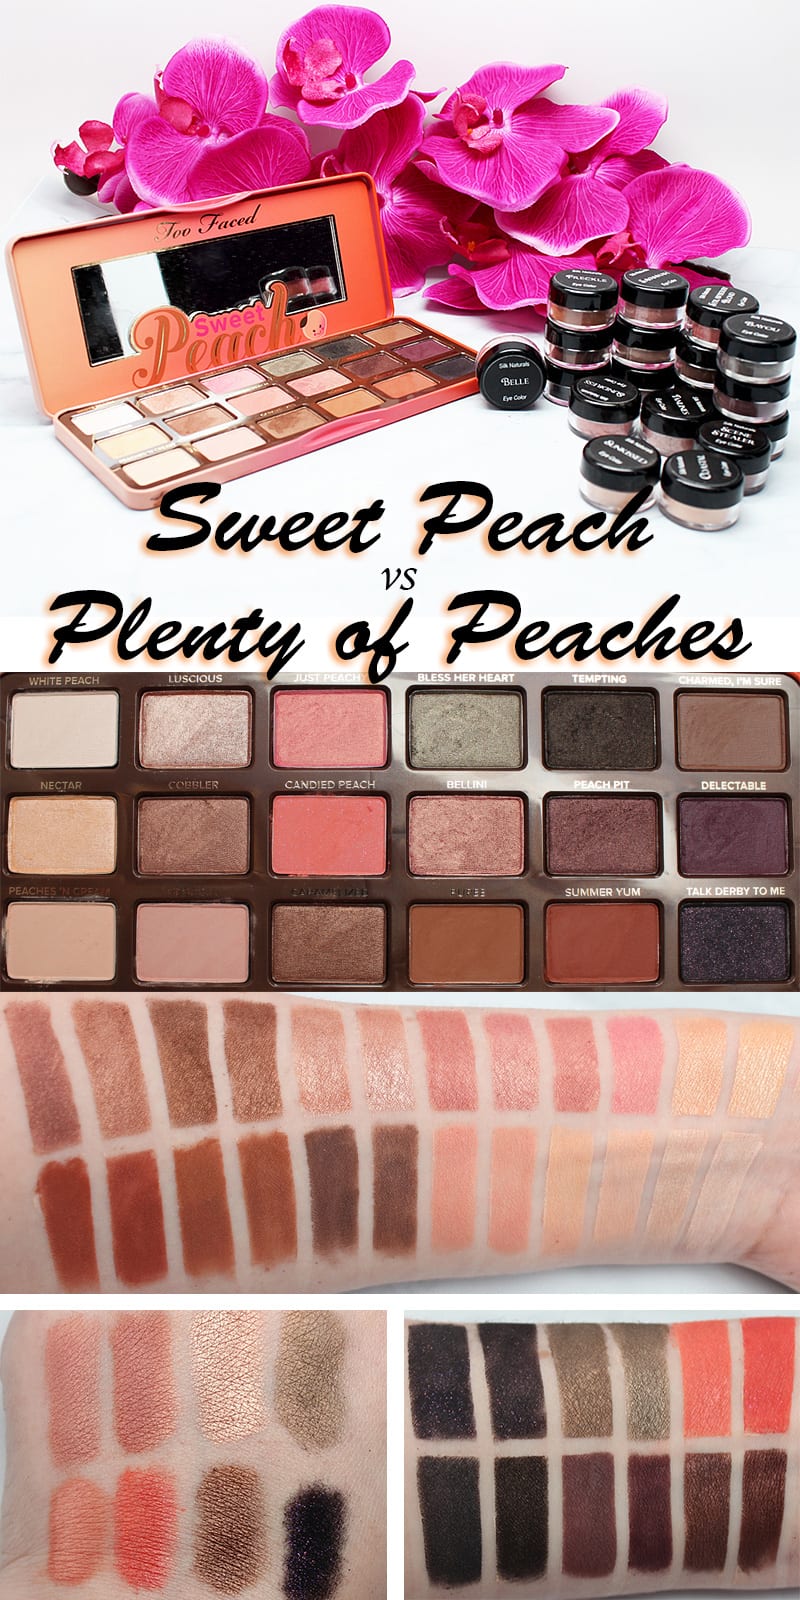 Too Faced Sweet Peach vs. Silk Naturals Plenty of Peaches Palette dupes, swatches, thoughts